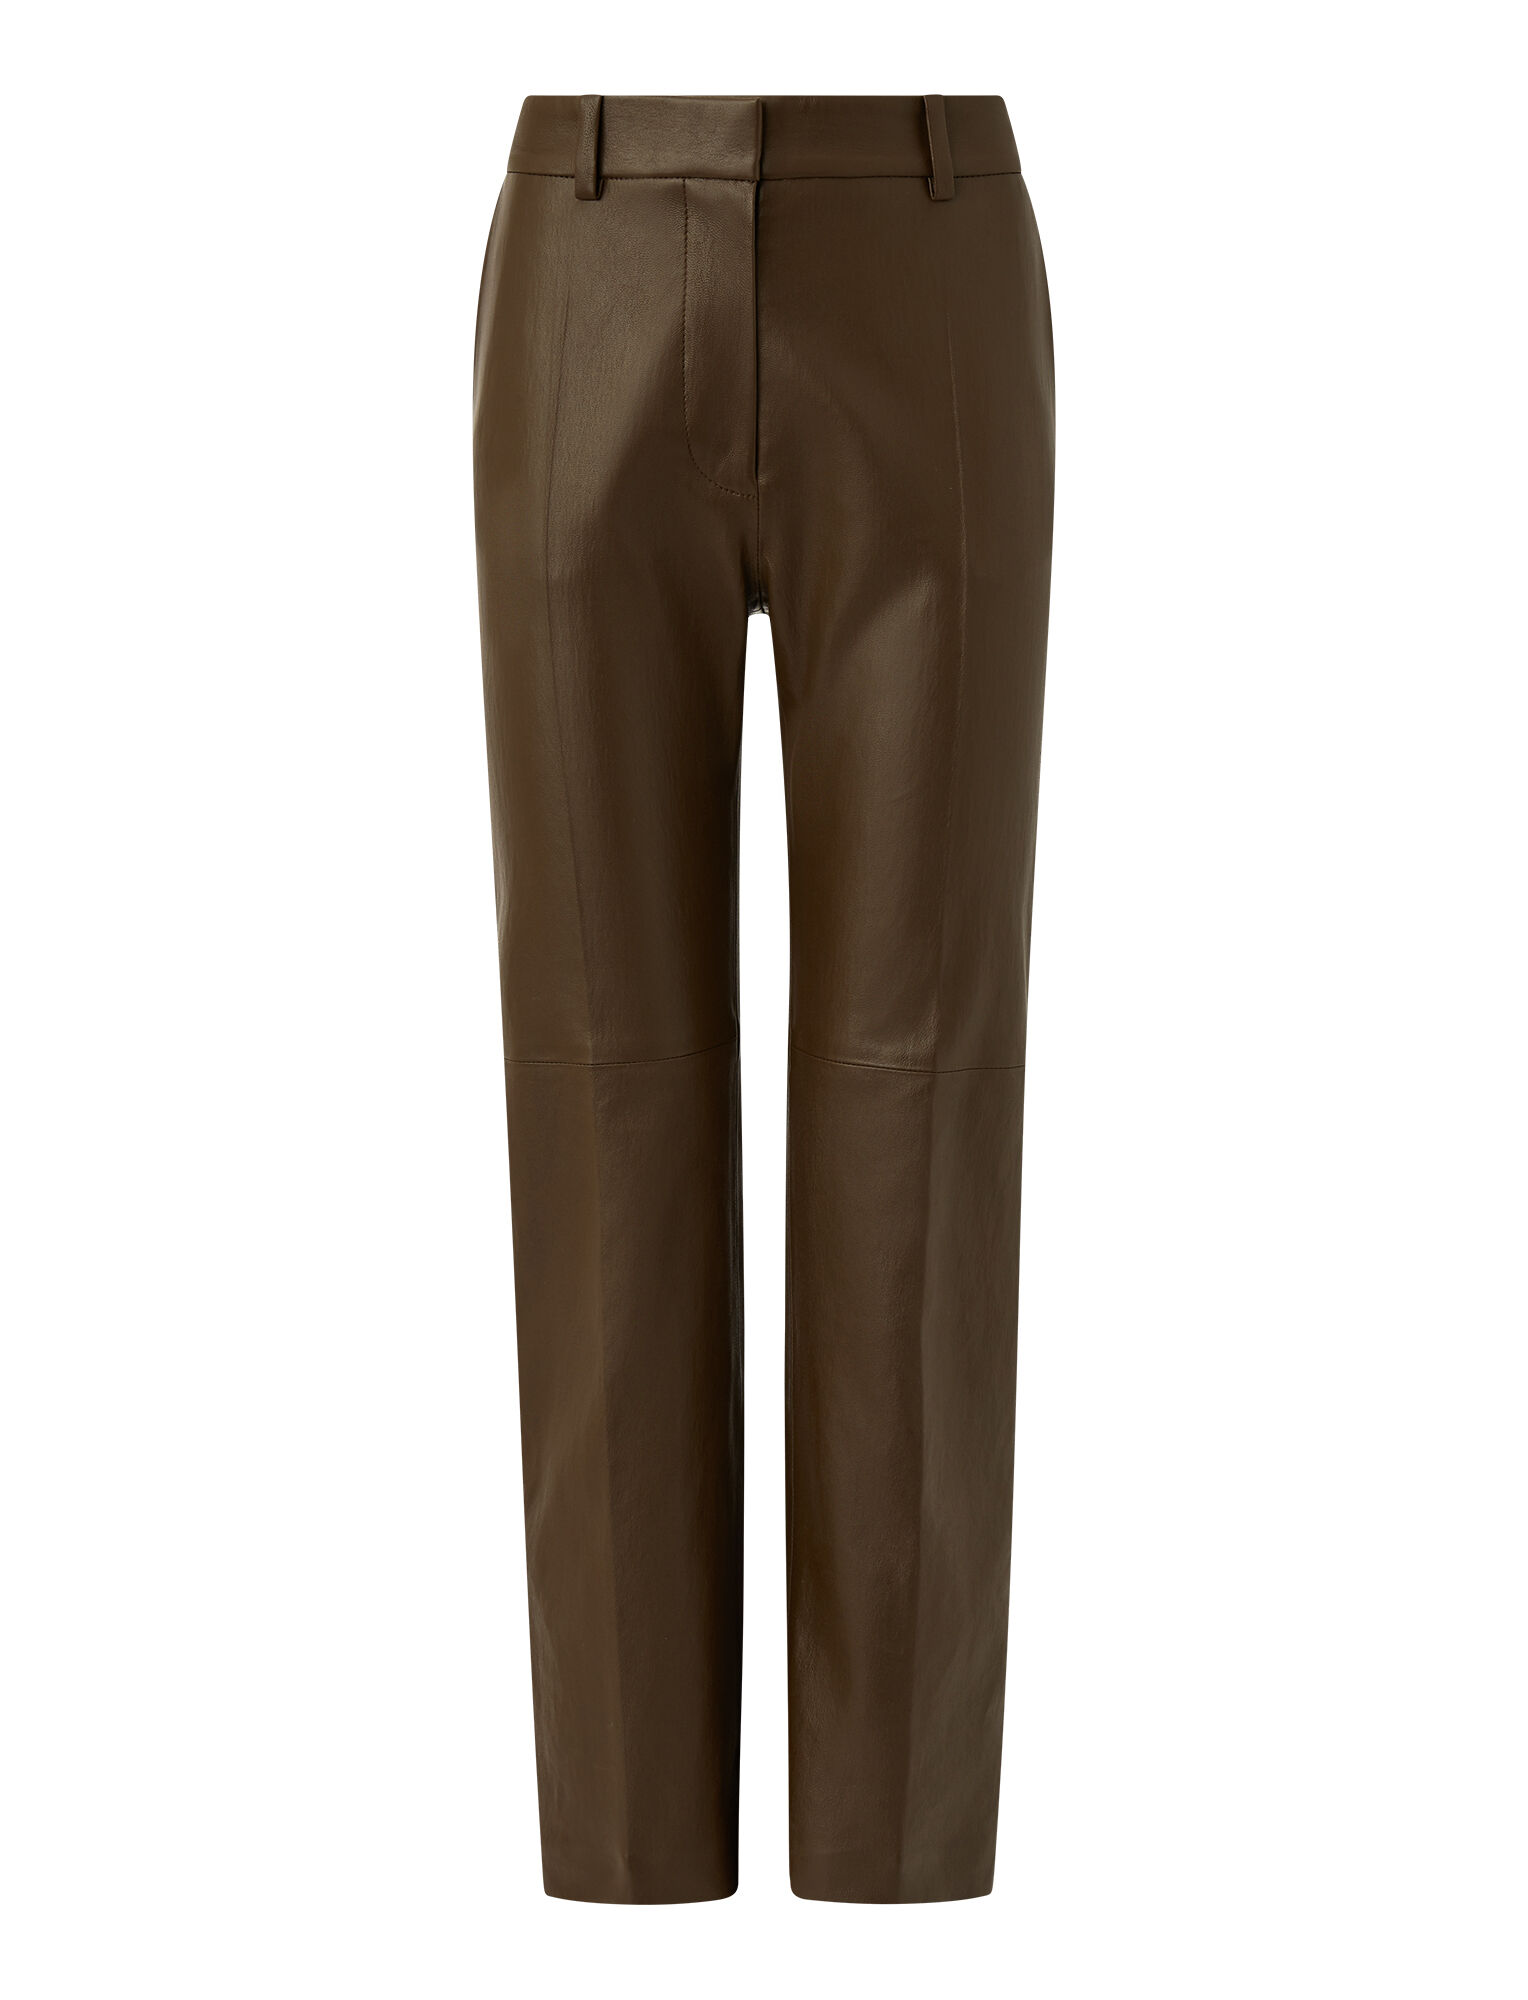 Joseph, Leather Stretch Coleman Trousers, in PINECONE